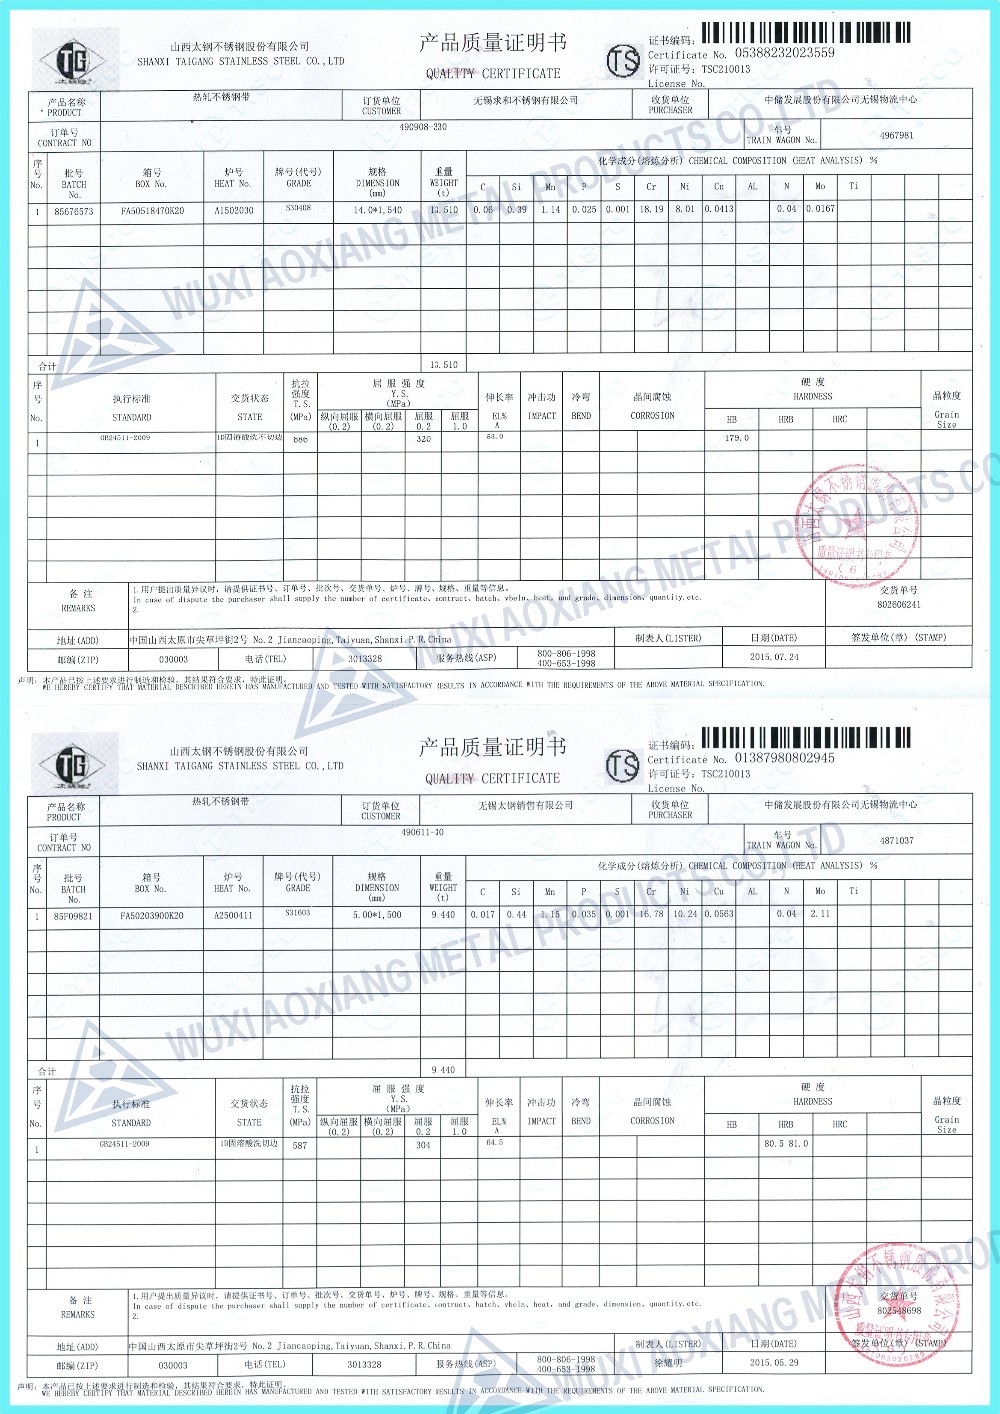 WUXI XINFUTIAN METAL PRODUCTS CO., LTD Certifications